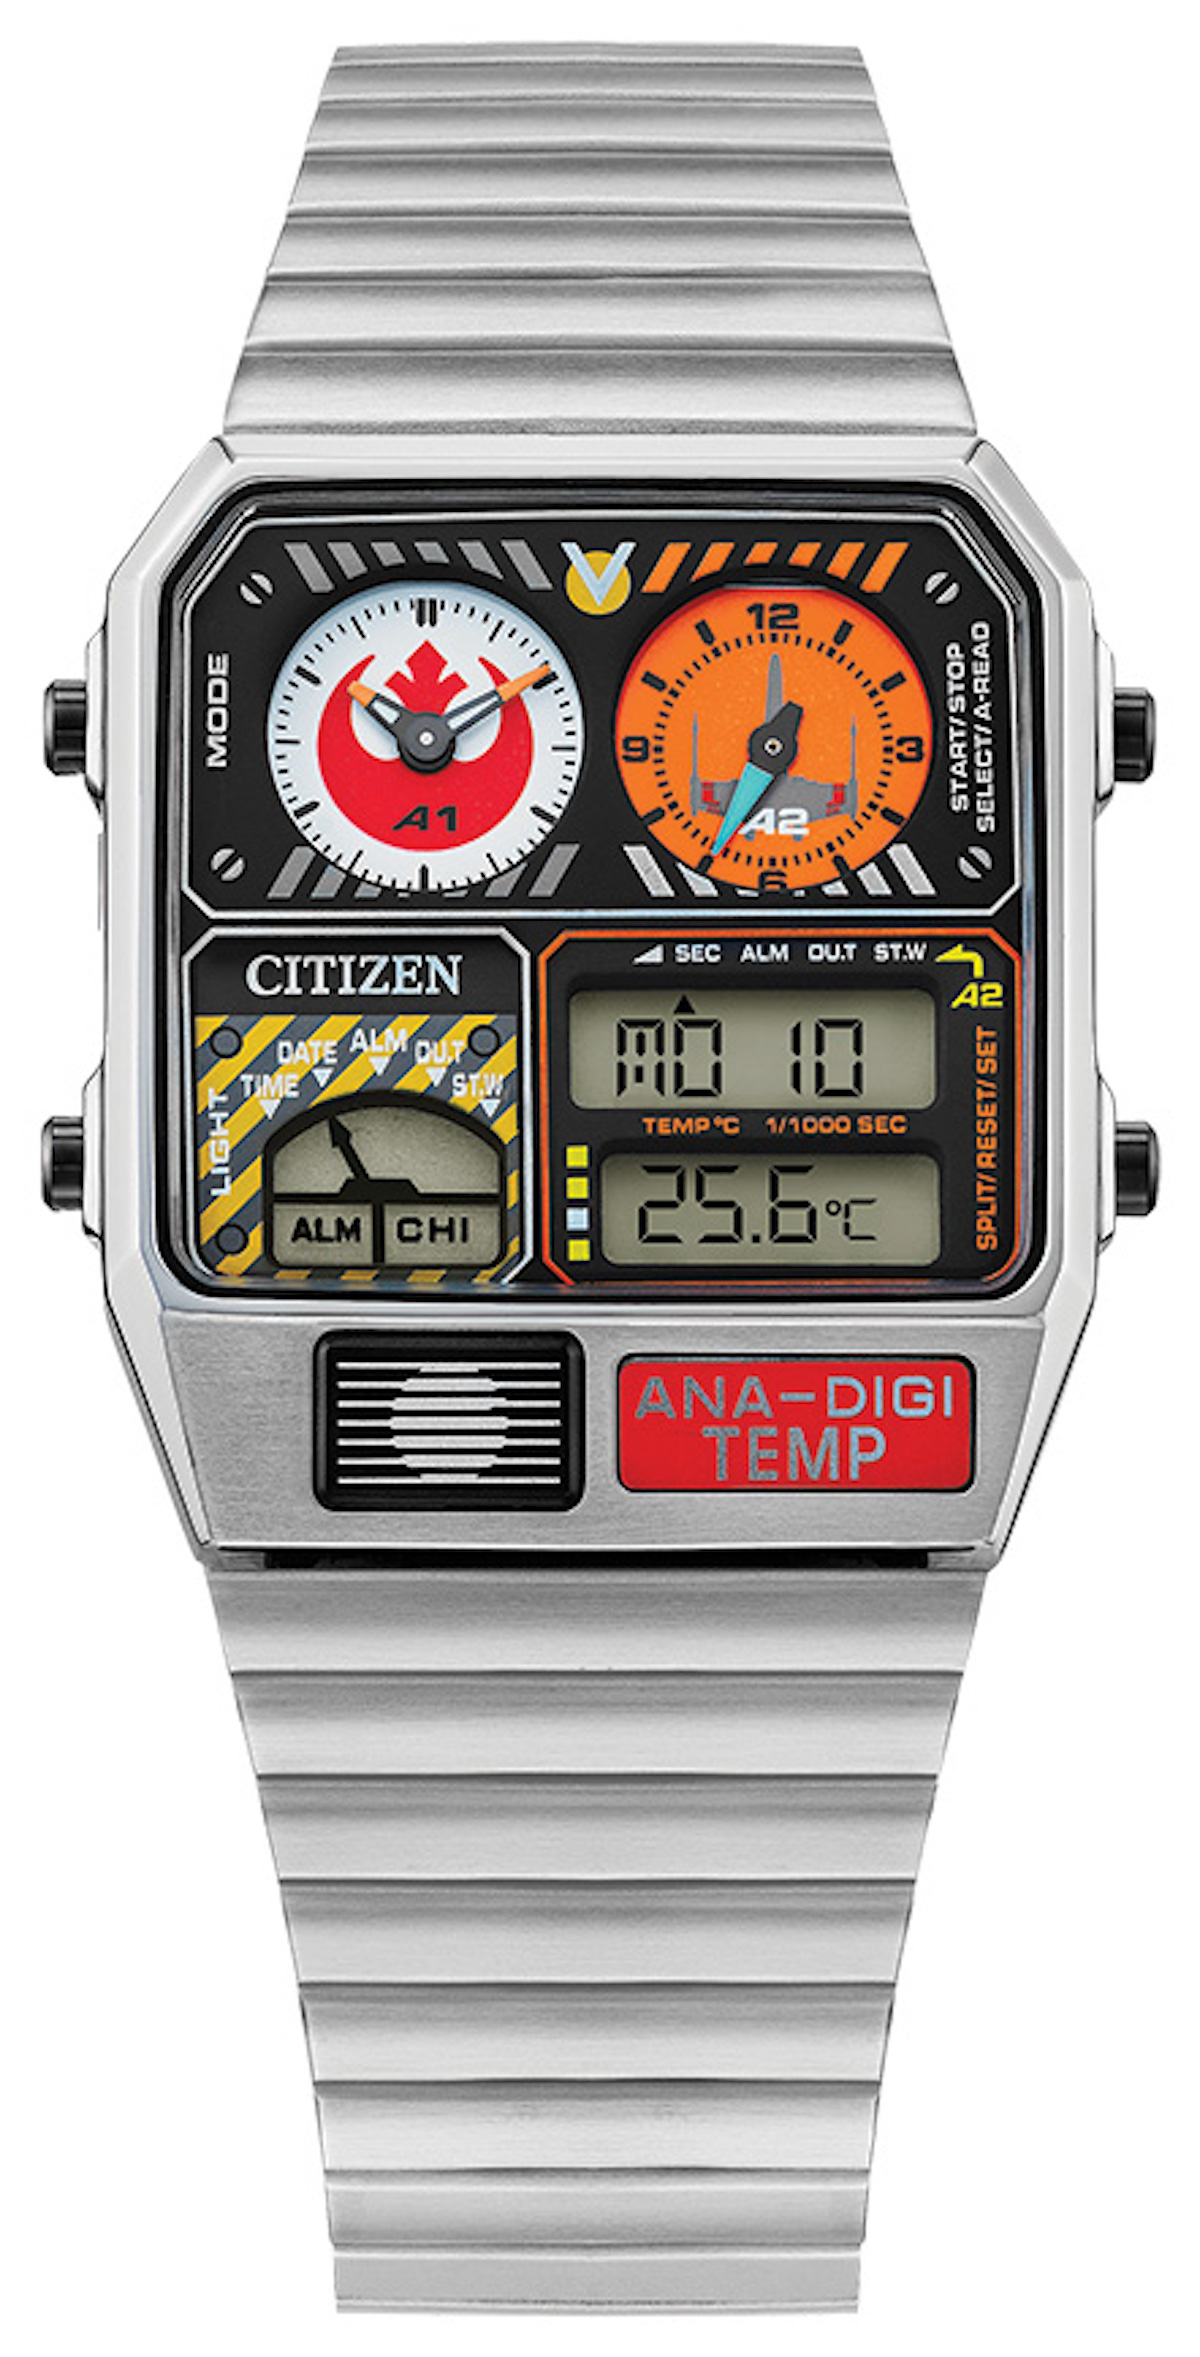 Citizen's Rebel Pilot watch honors Star Wars characters.